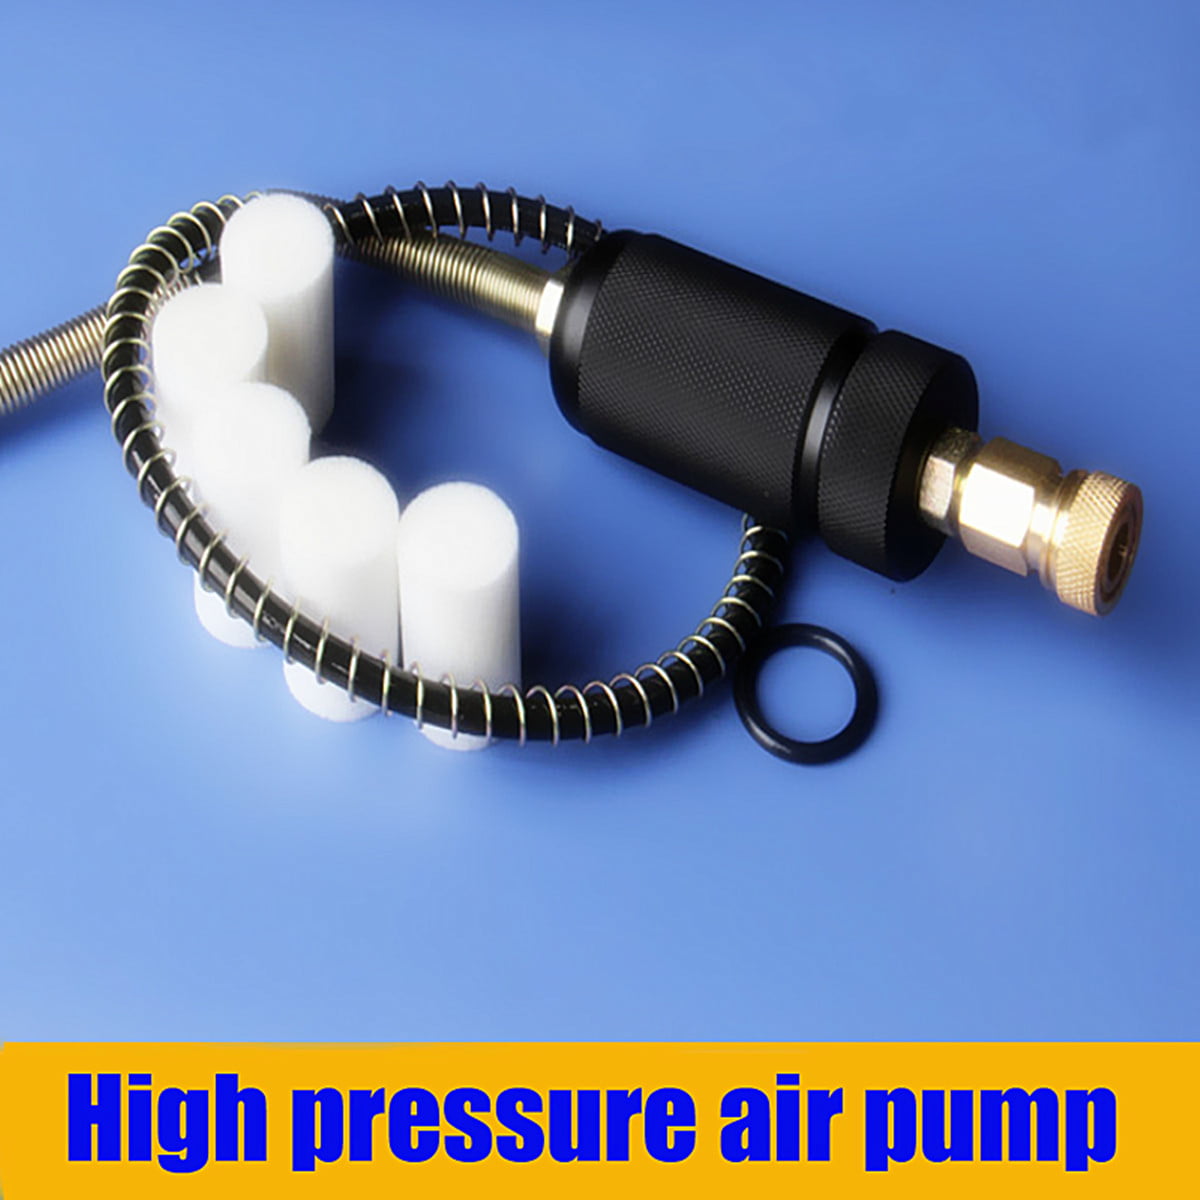 Blue Filter Separator Pump High Pressure For YONG HENG 30MPa Air Compressor PCP 